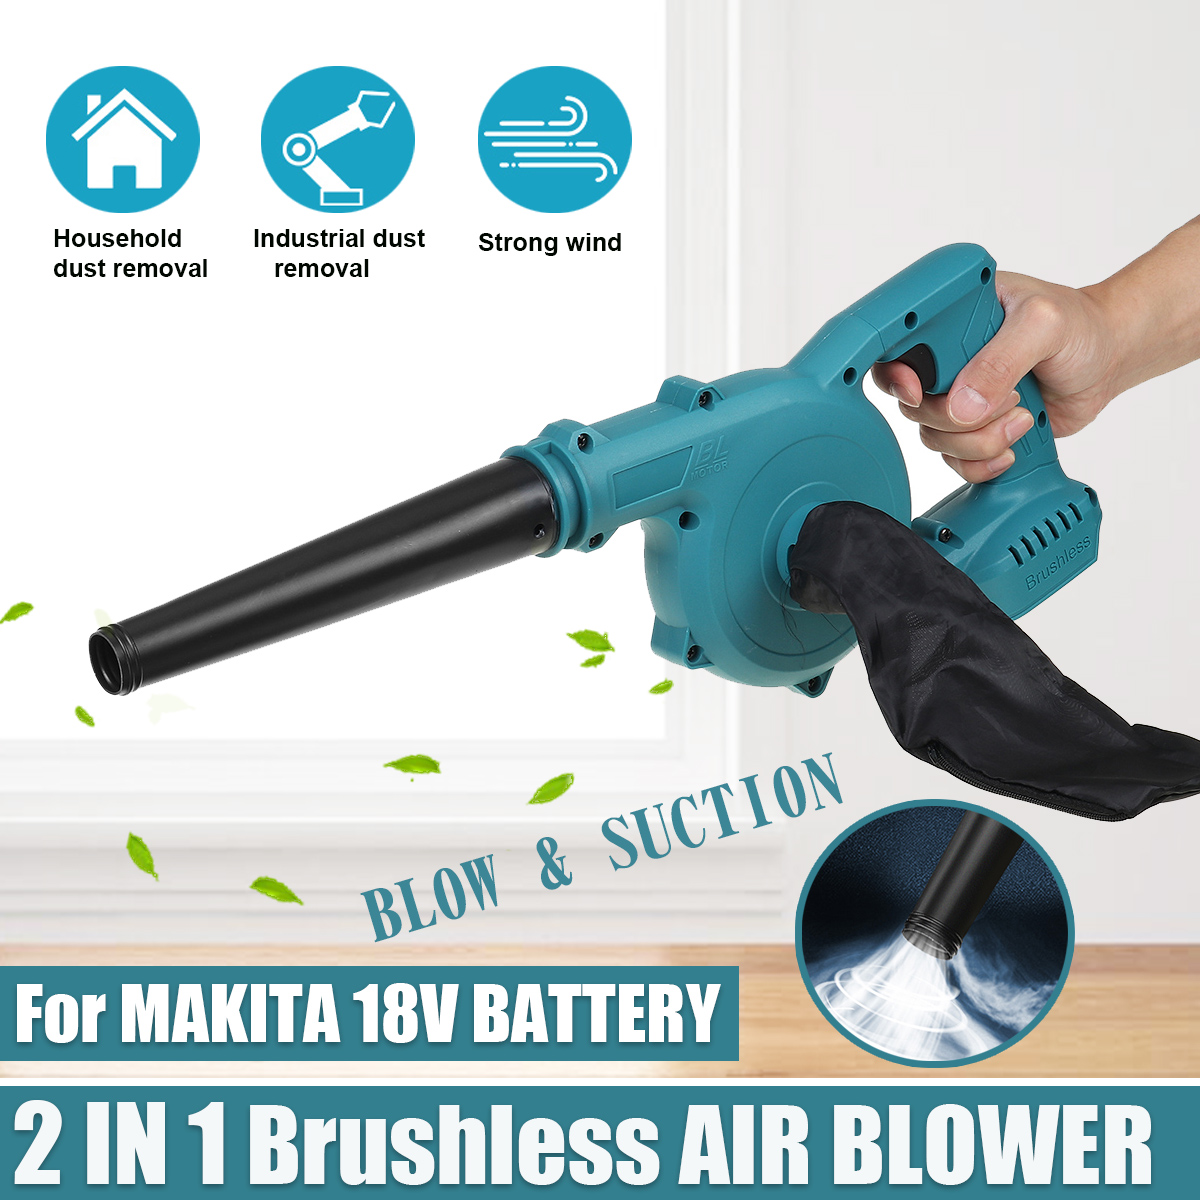 2-In-1-Brushless-Electric-Air-Blower--Vacuum-Suction-Dust-Cleaner-Leaf-Blower-For-Makita-18V-Battery-1860997-3